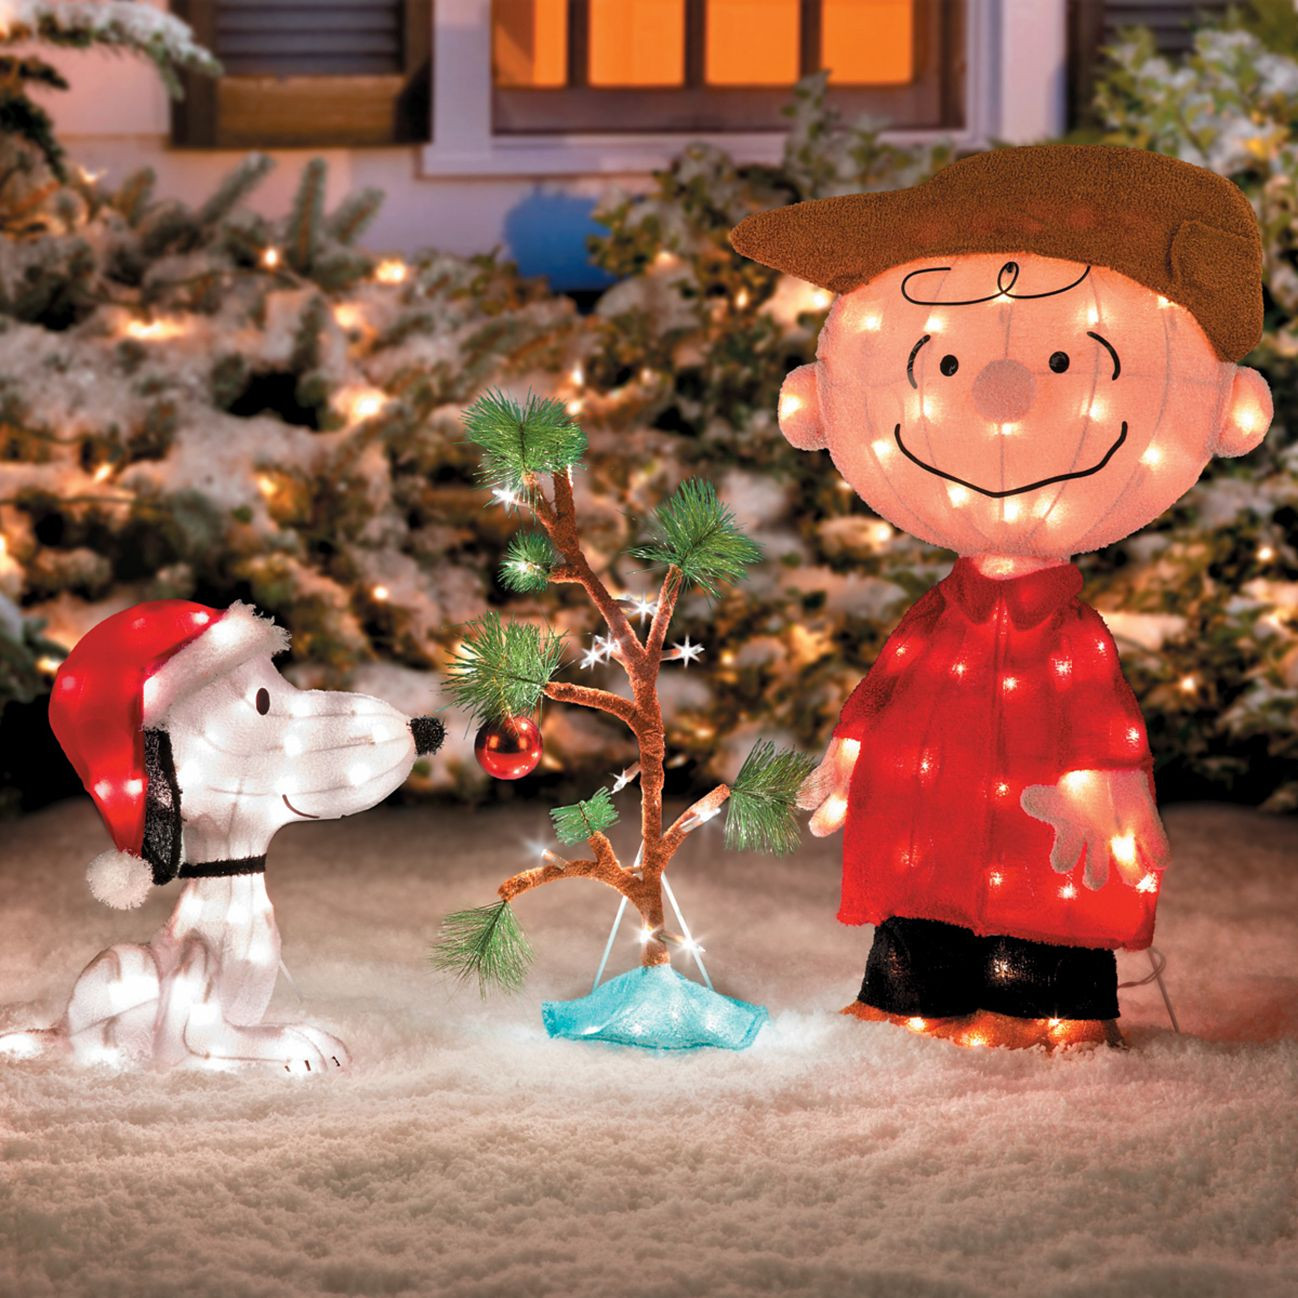 20 HQ Photos Snoopy Christmas Decorations For Outdoors - Amazon.com : Christmas Outdoor Decor Peanut Gang with Tree ...